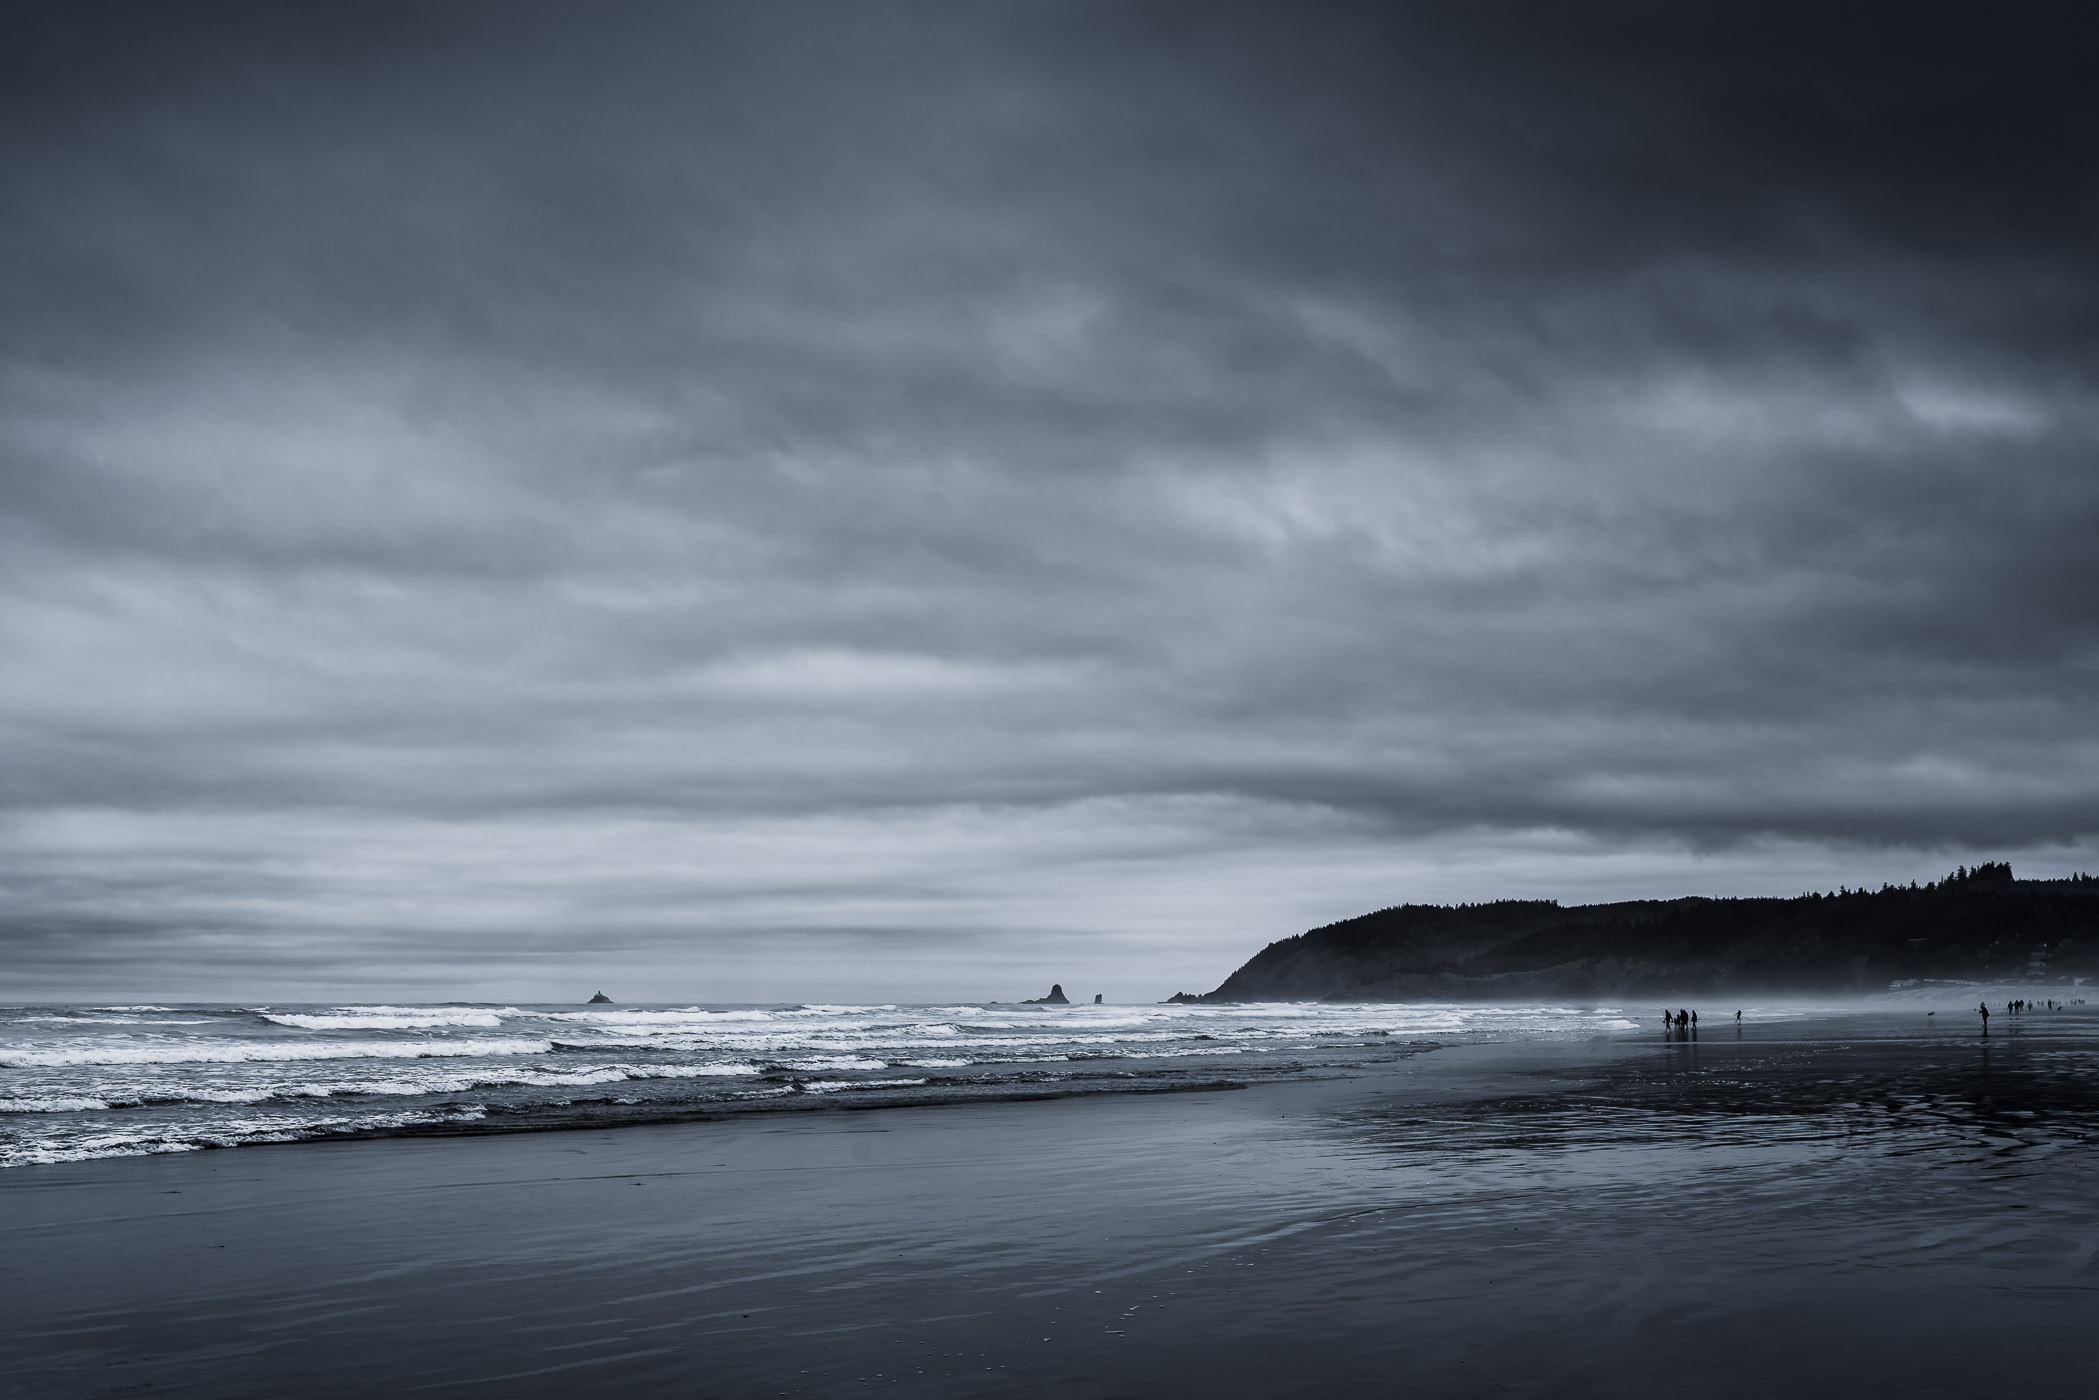 The Pacific Ocean washes ashore at Oregon's Cannon Beach on a cold, overcast day.